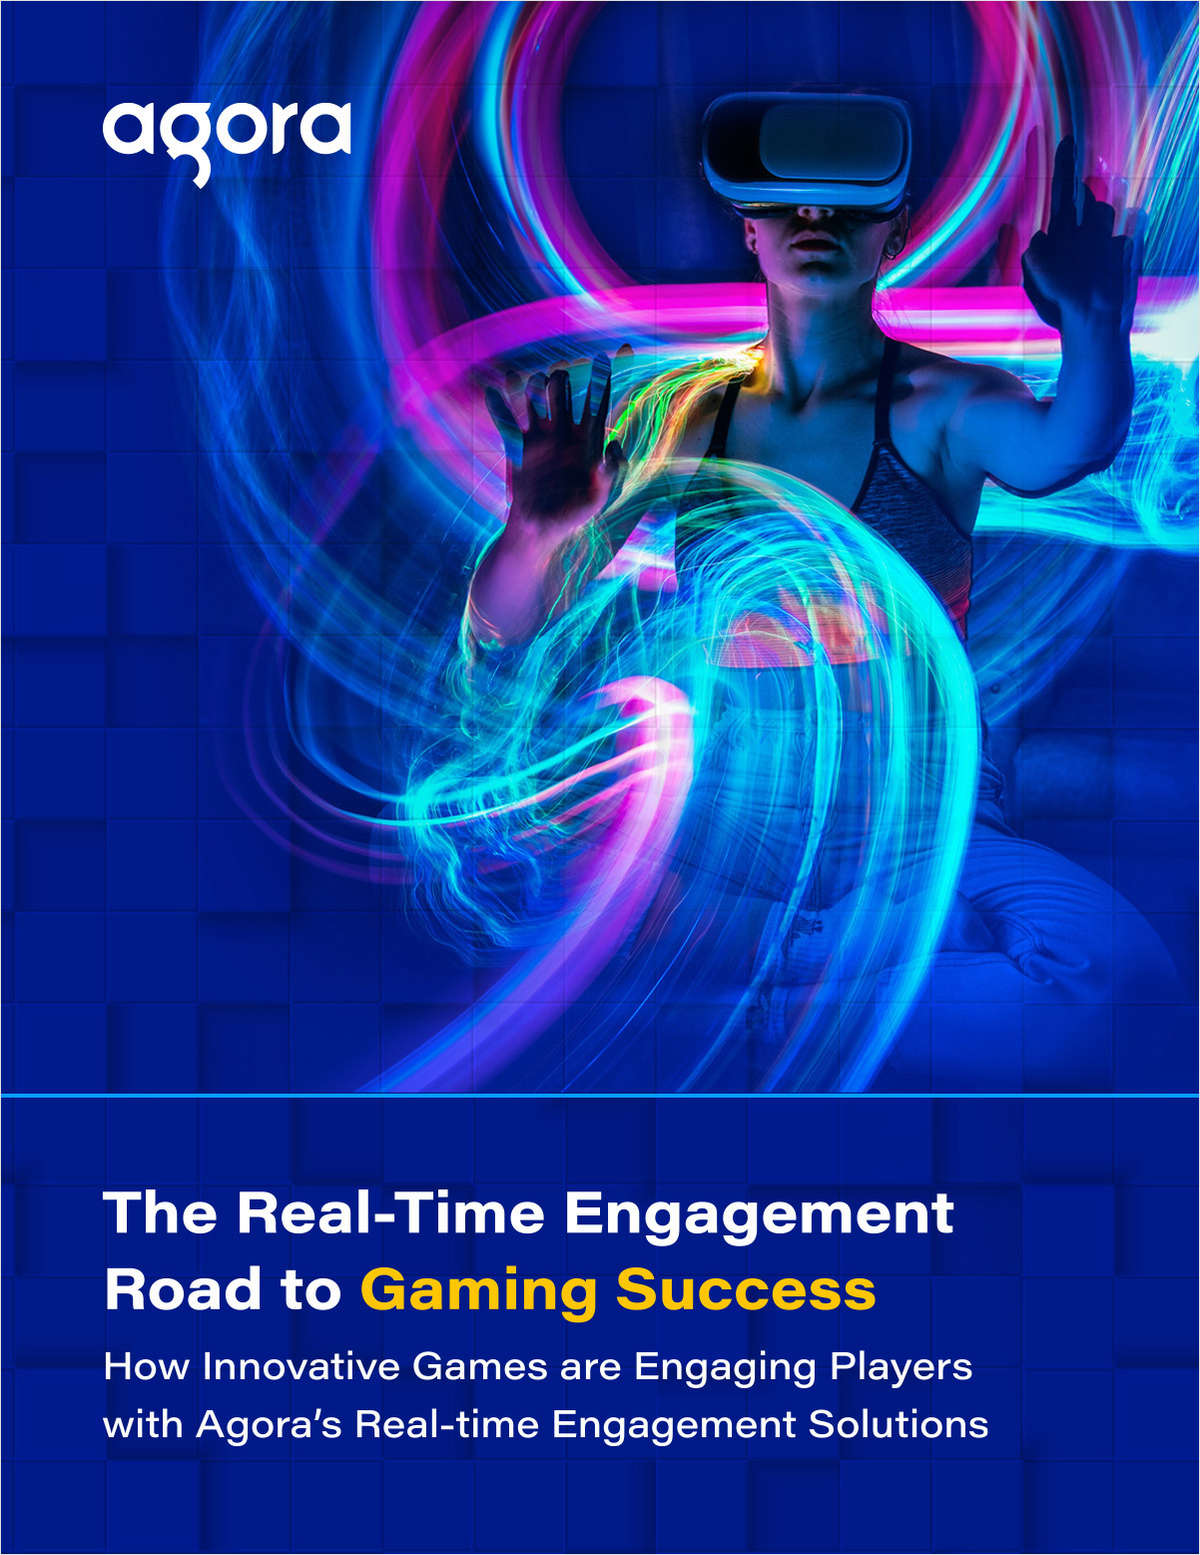 How Innovative Games are Engaging Players with Agora's Real-Time Engagement Solutions